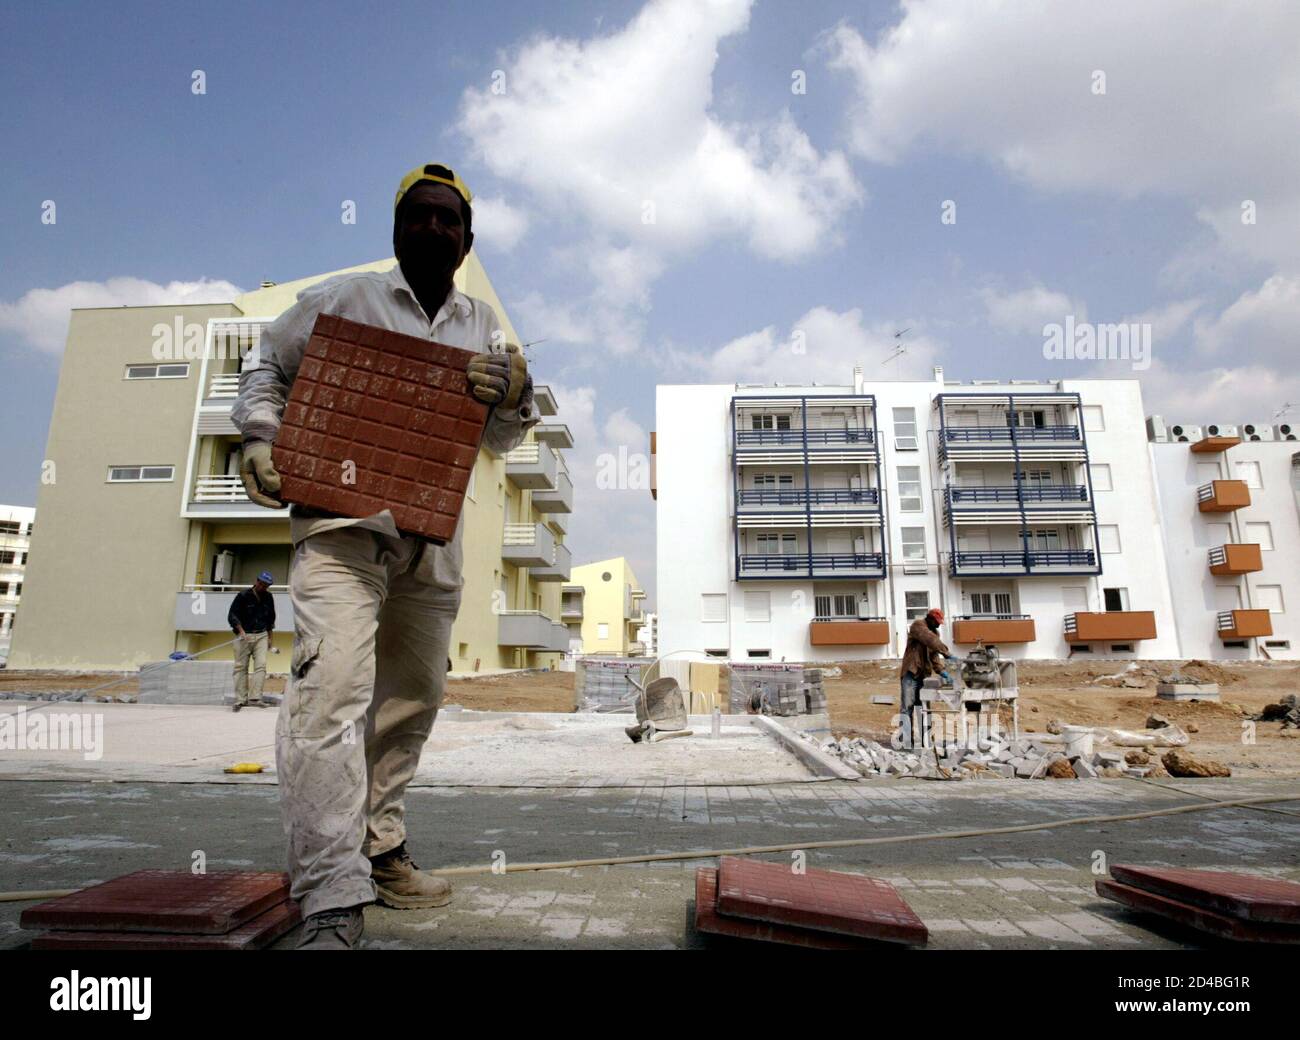 - PHOTO TAKEN 10OCT03 - A worker lifts a tile during construction works at the Olympic Village in Athens October 10, 2003. The village will host some 10,000 athetes and team members during the Athens 2004 Olympic Games. Foto de stock